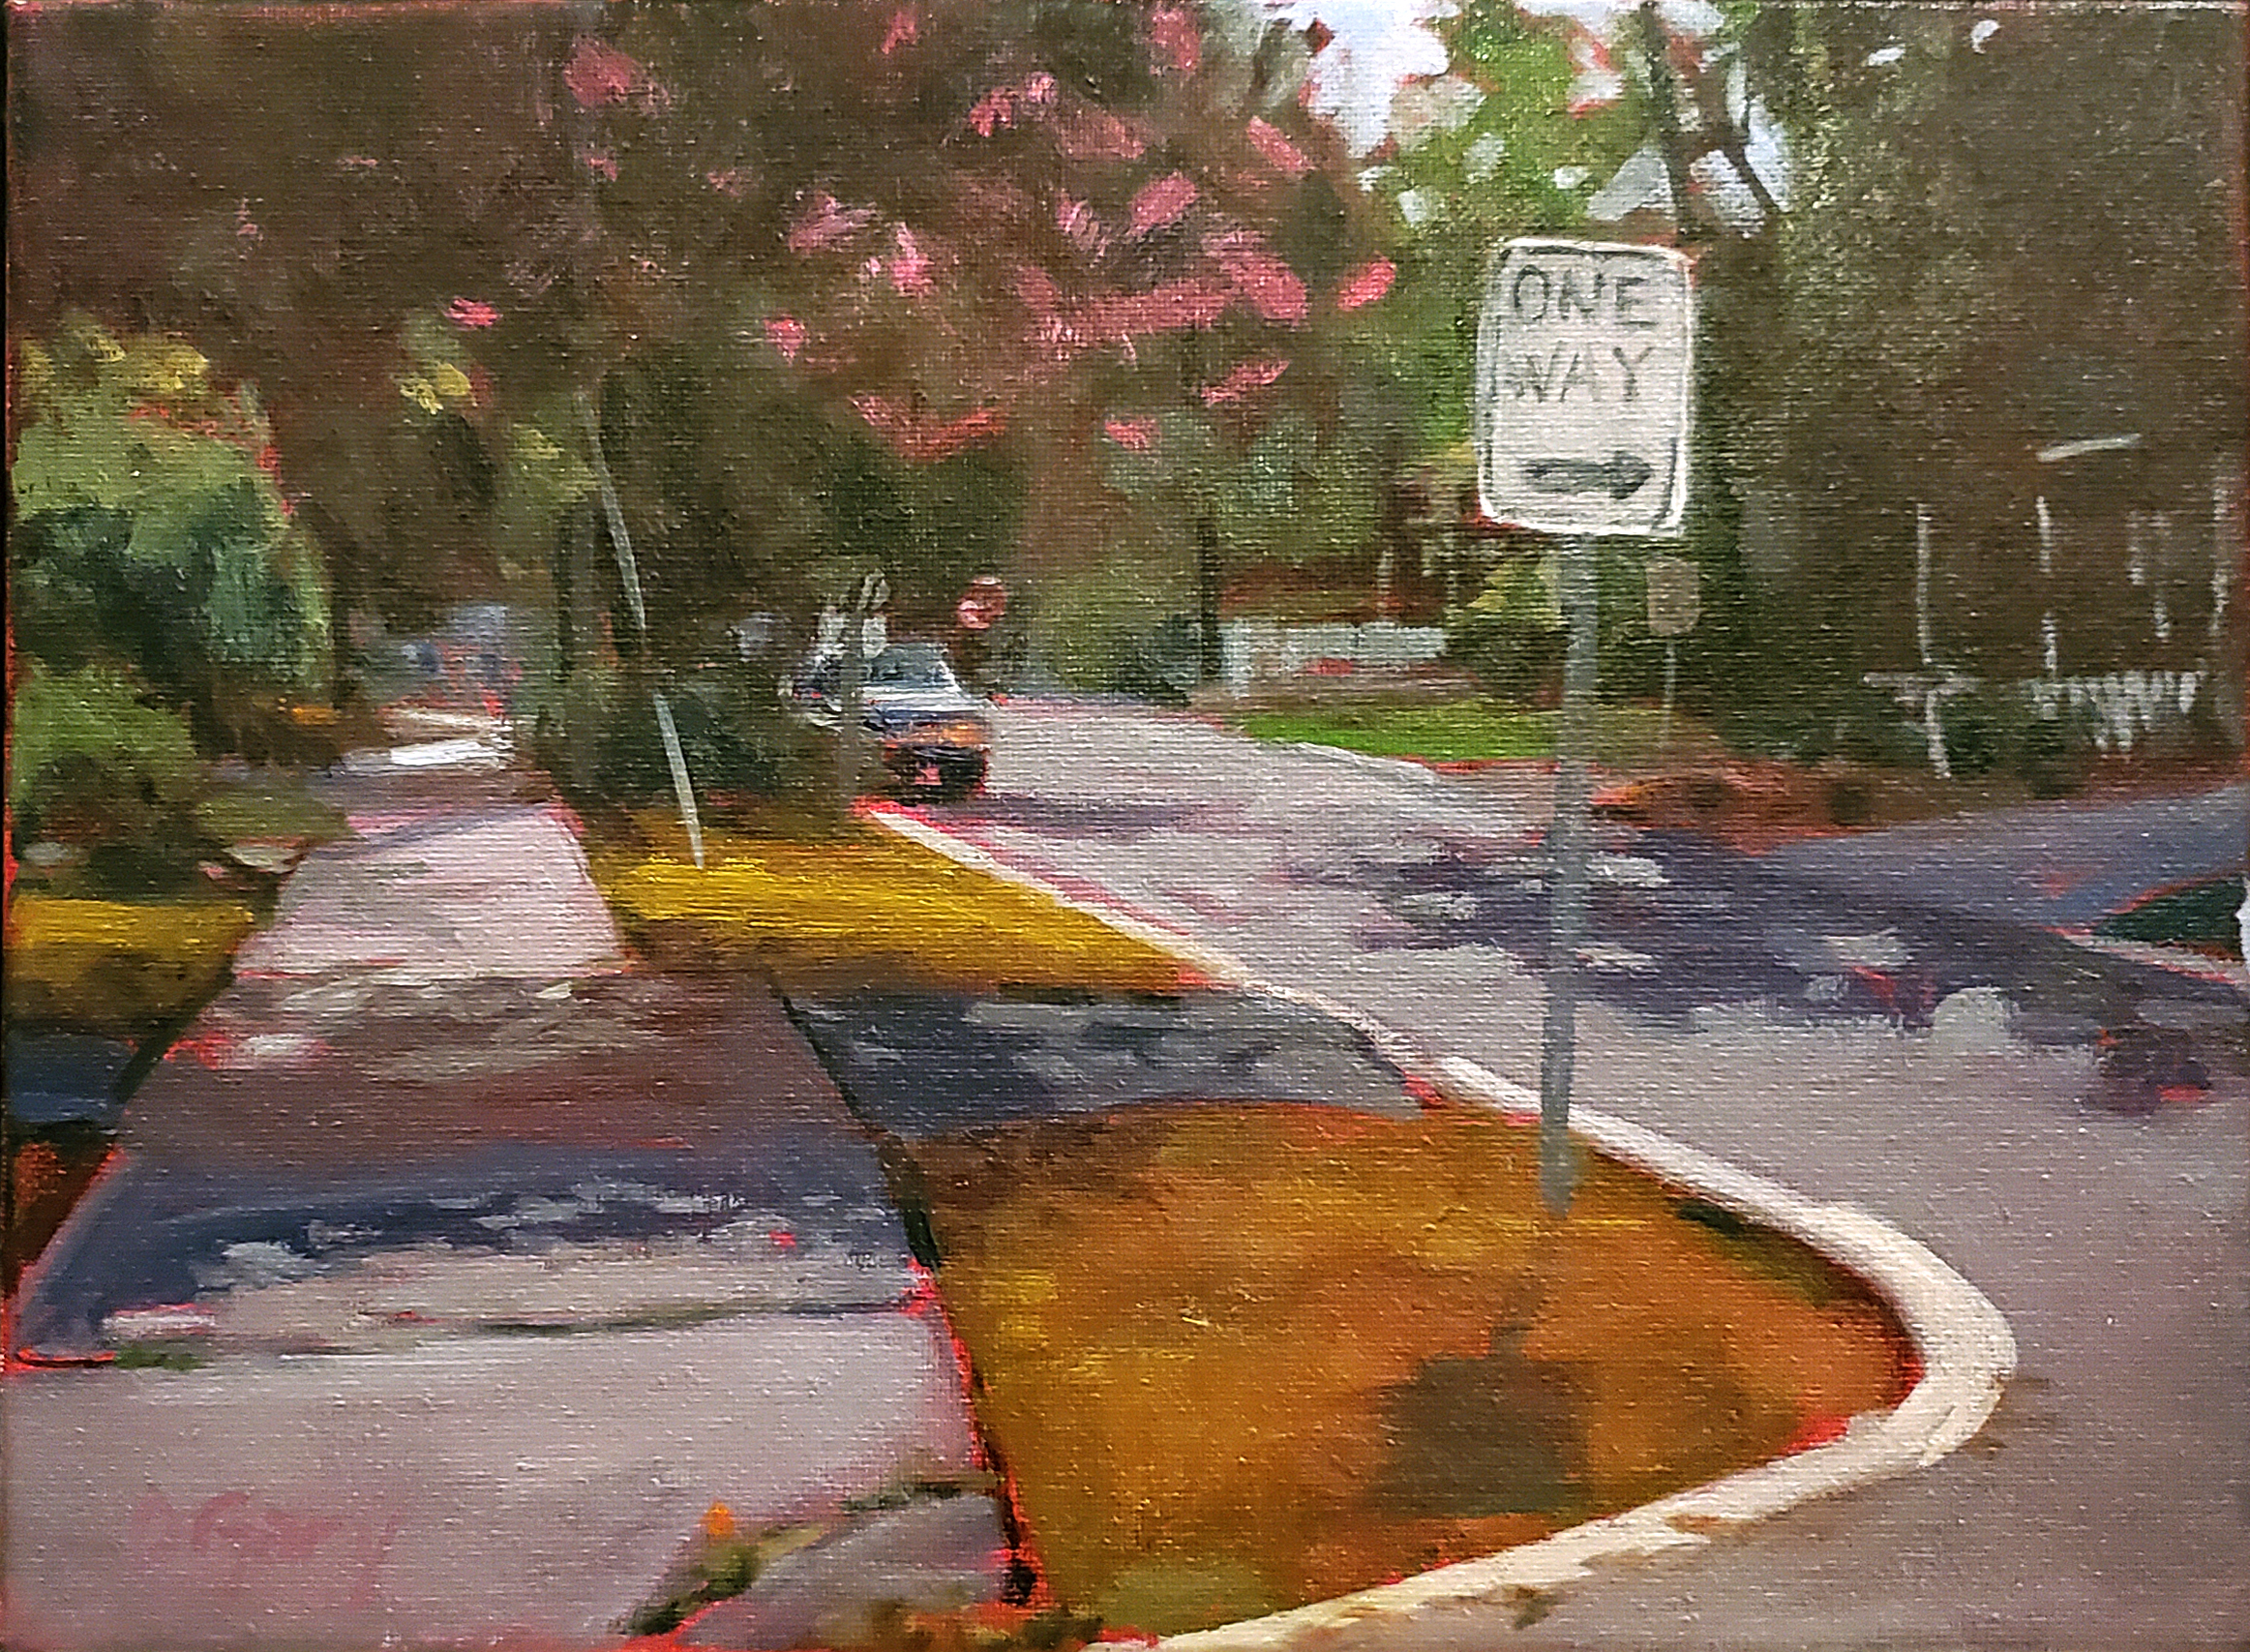 "One Way" by David Gary, sold during the Wet Paint sale